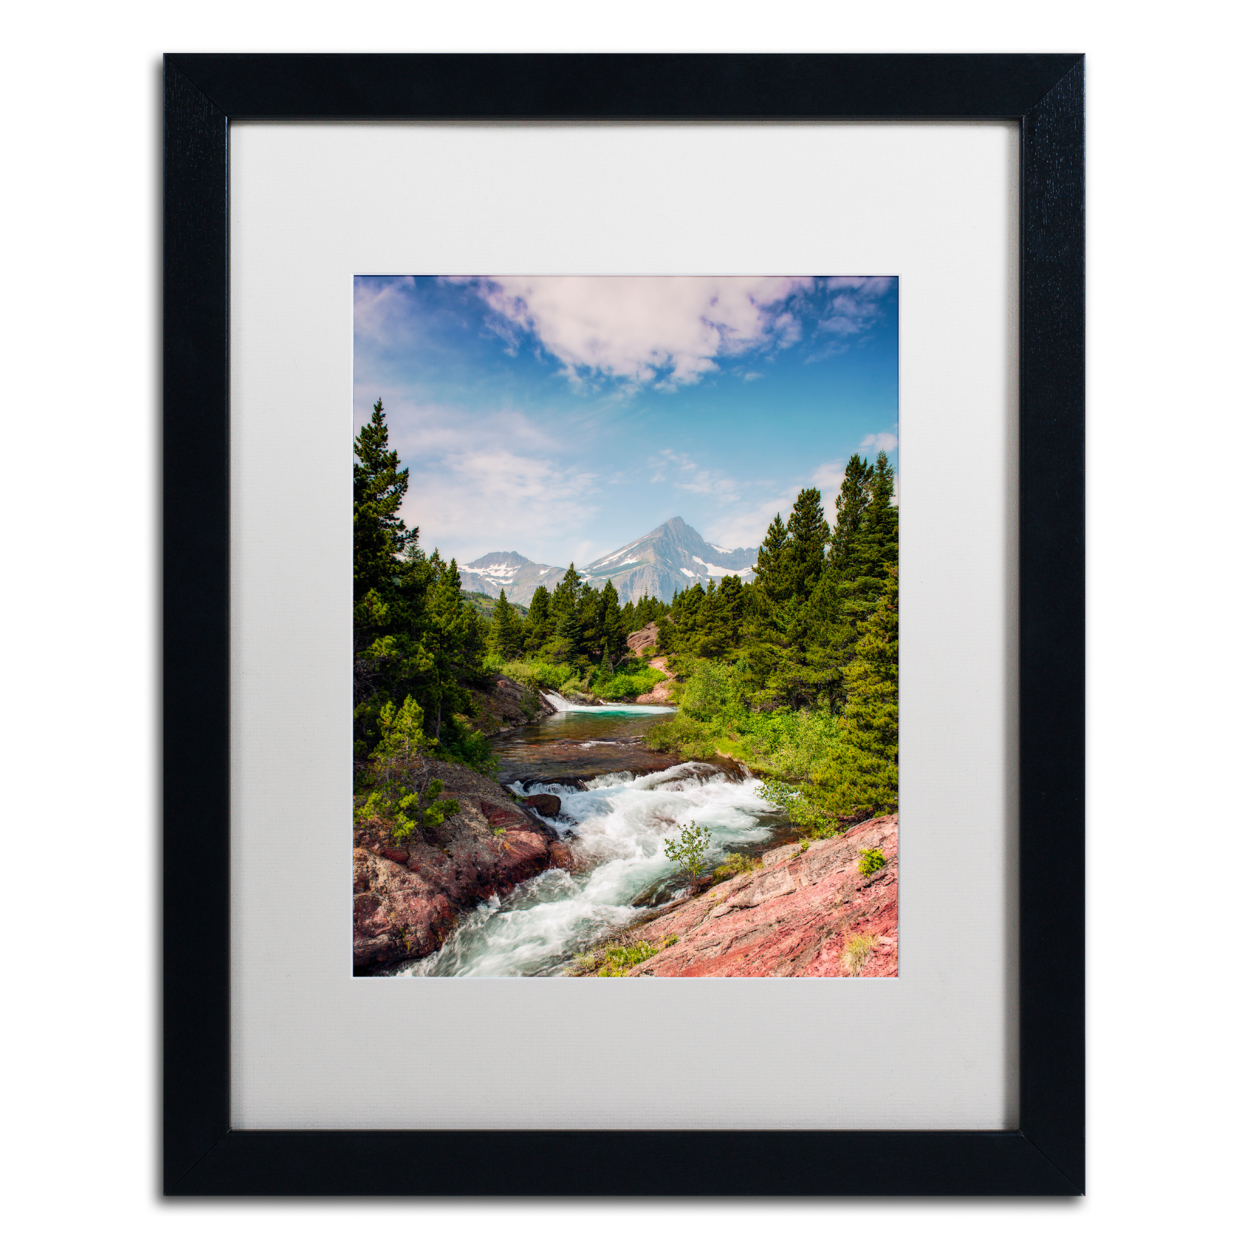 Michael Blanchette Photography 'Glacial Creek' Black Wooden Framed Art 18 X 22 Inches